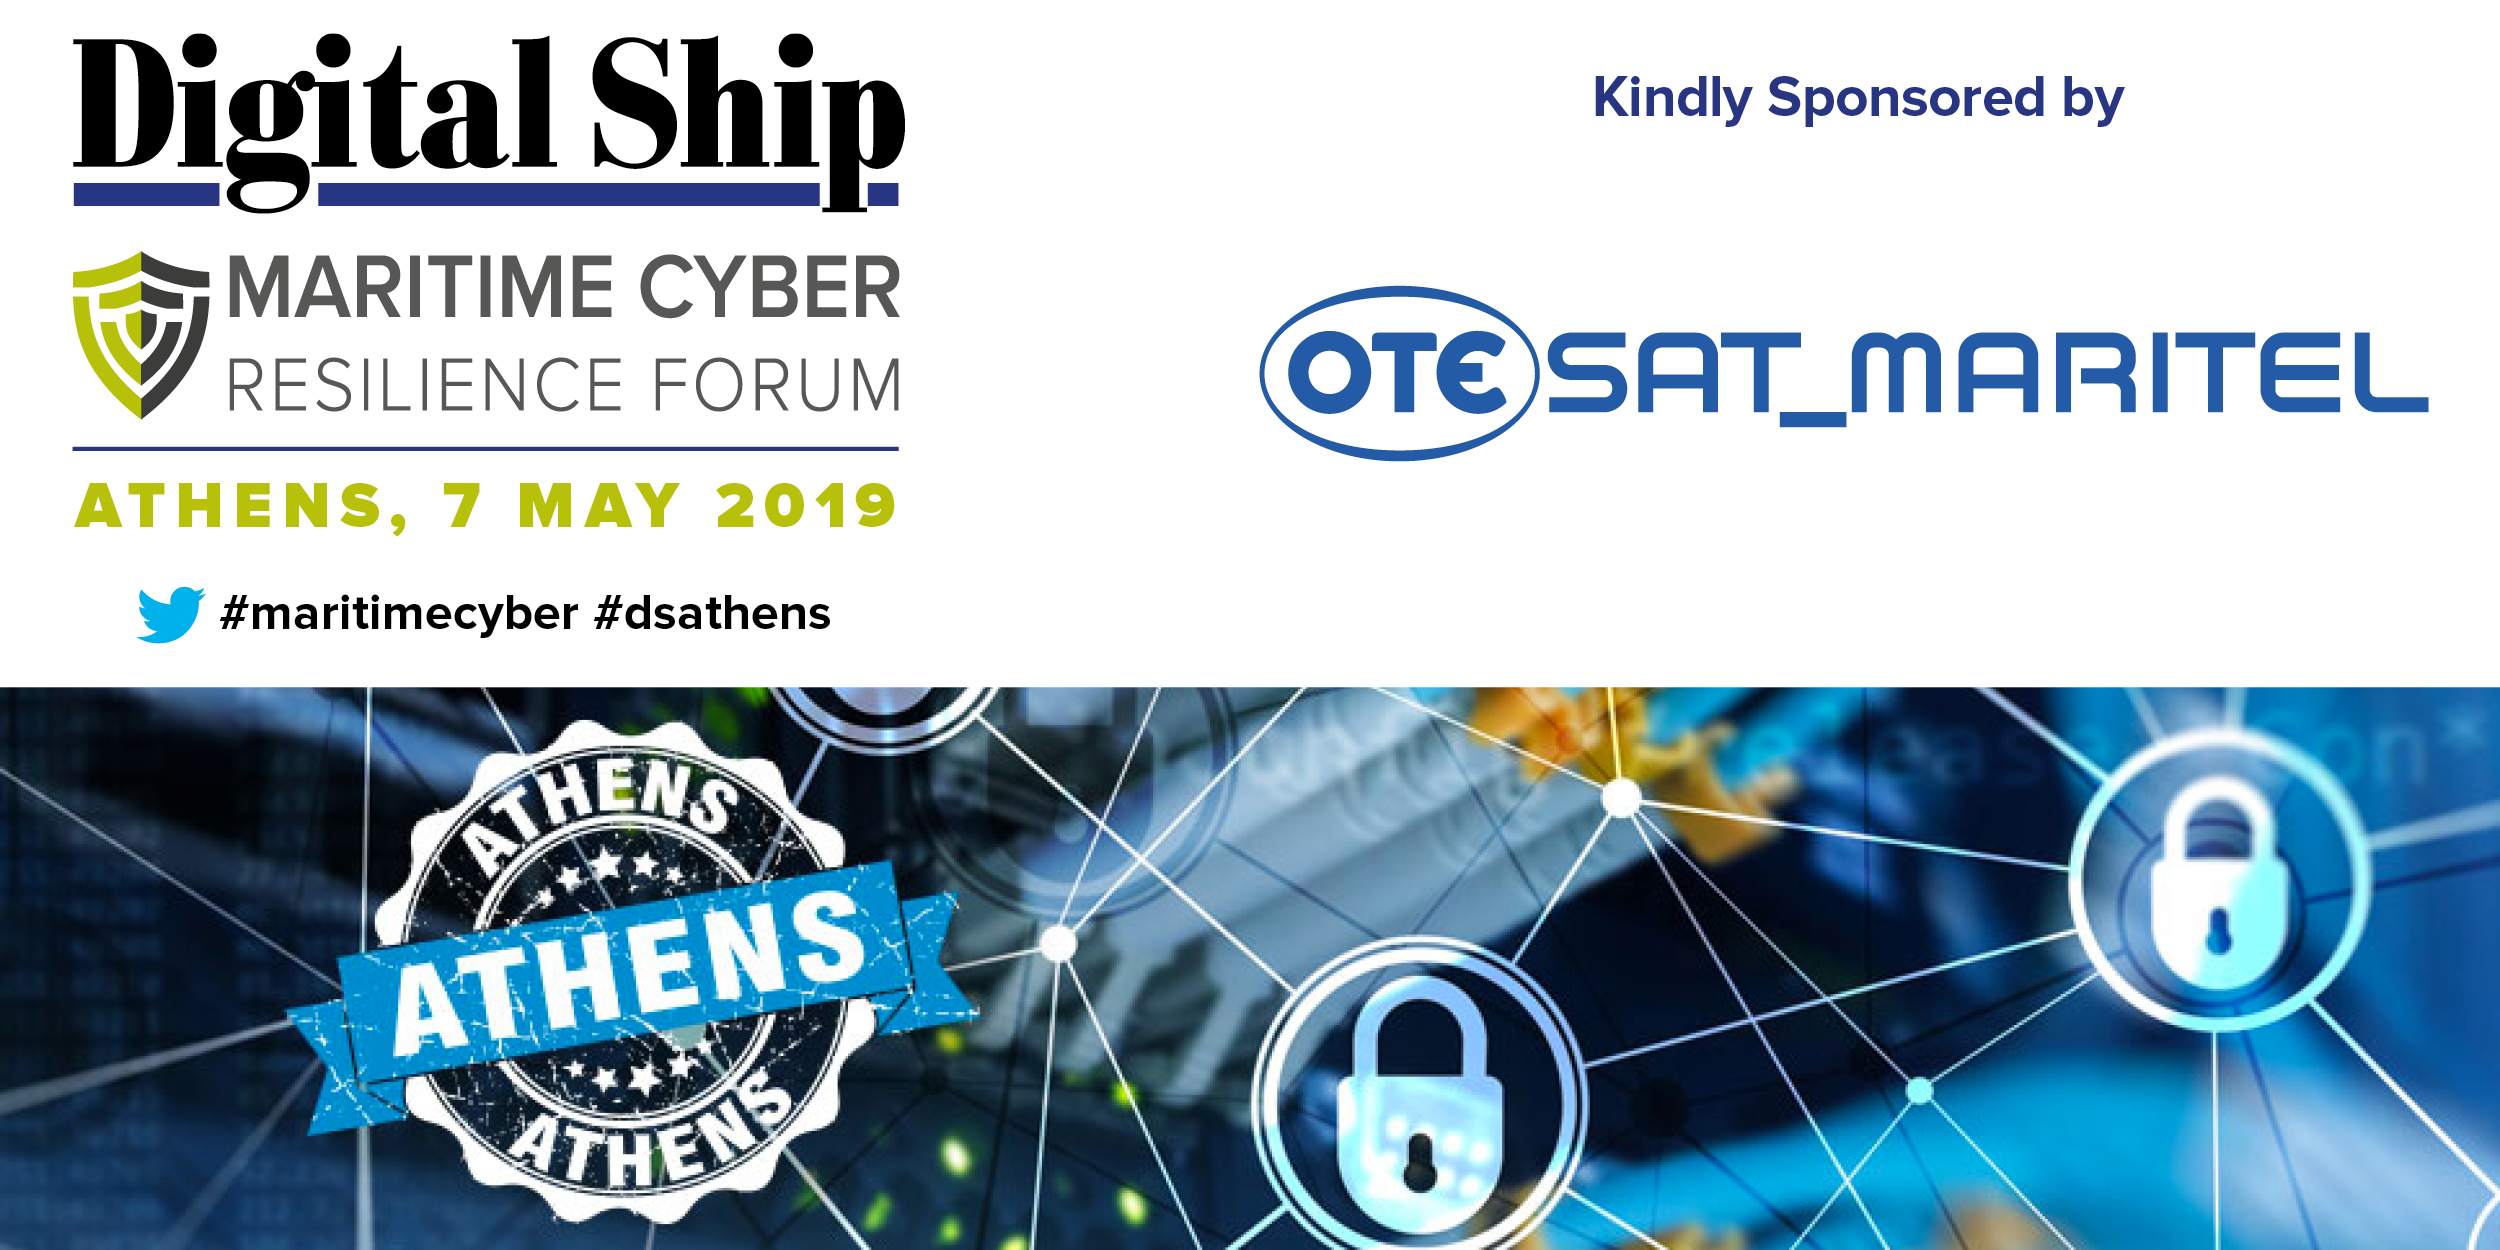 Participation at Digital Ship Maritime Cyber Resilience Forum